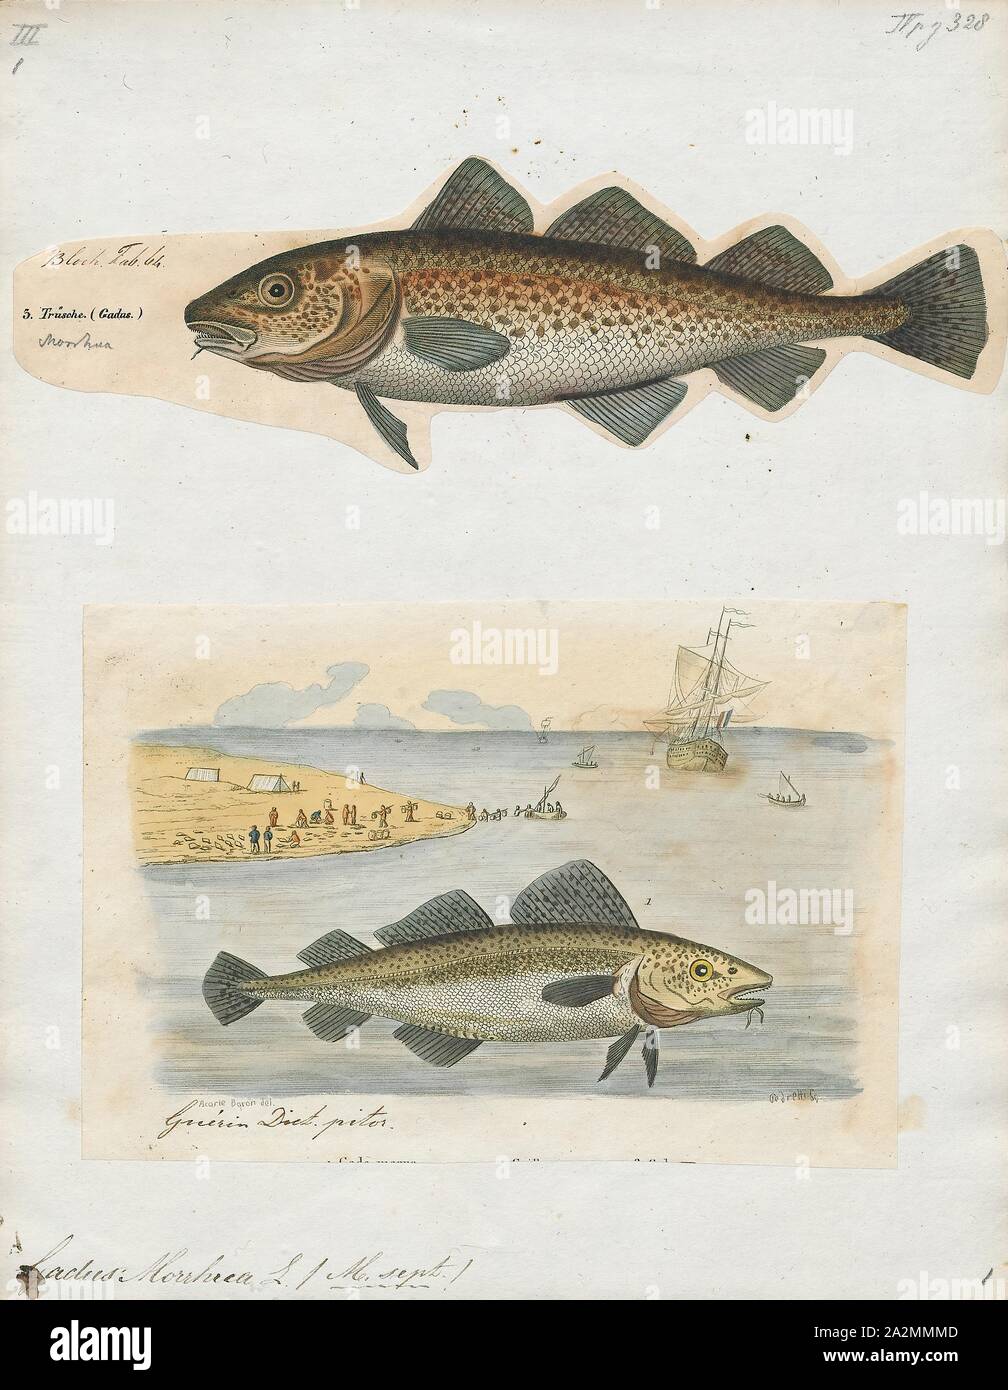 Gadus morrhua, Print, Gadus is a genus of demersal fish in the family Gadidae, commonly known as cod, although there are additional cod species in other genera. The best known member of the genus is the Atlantic cod., 1700-1880 Stock Photo